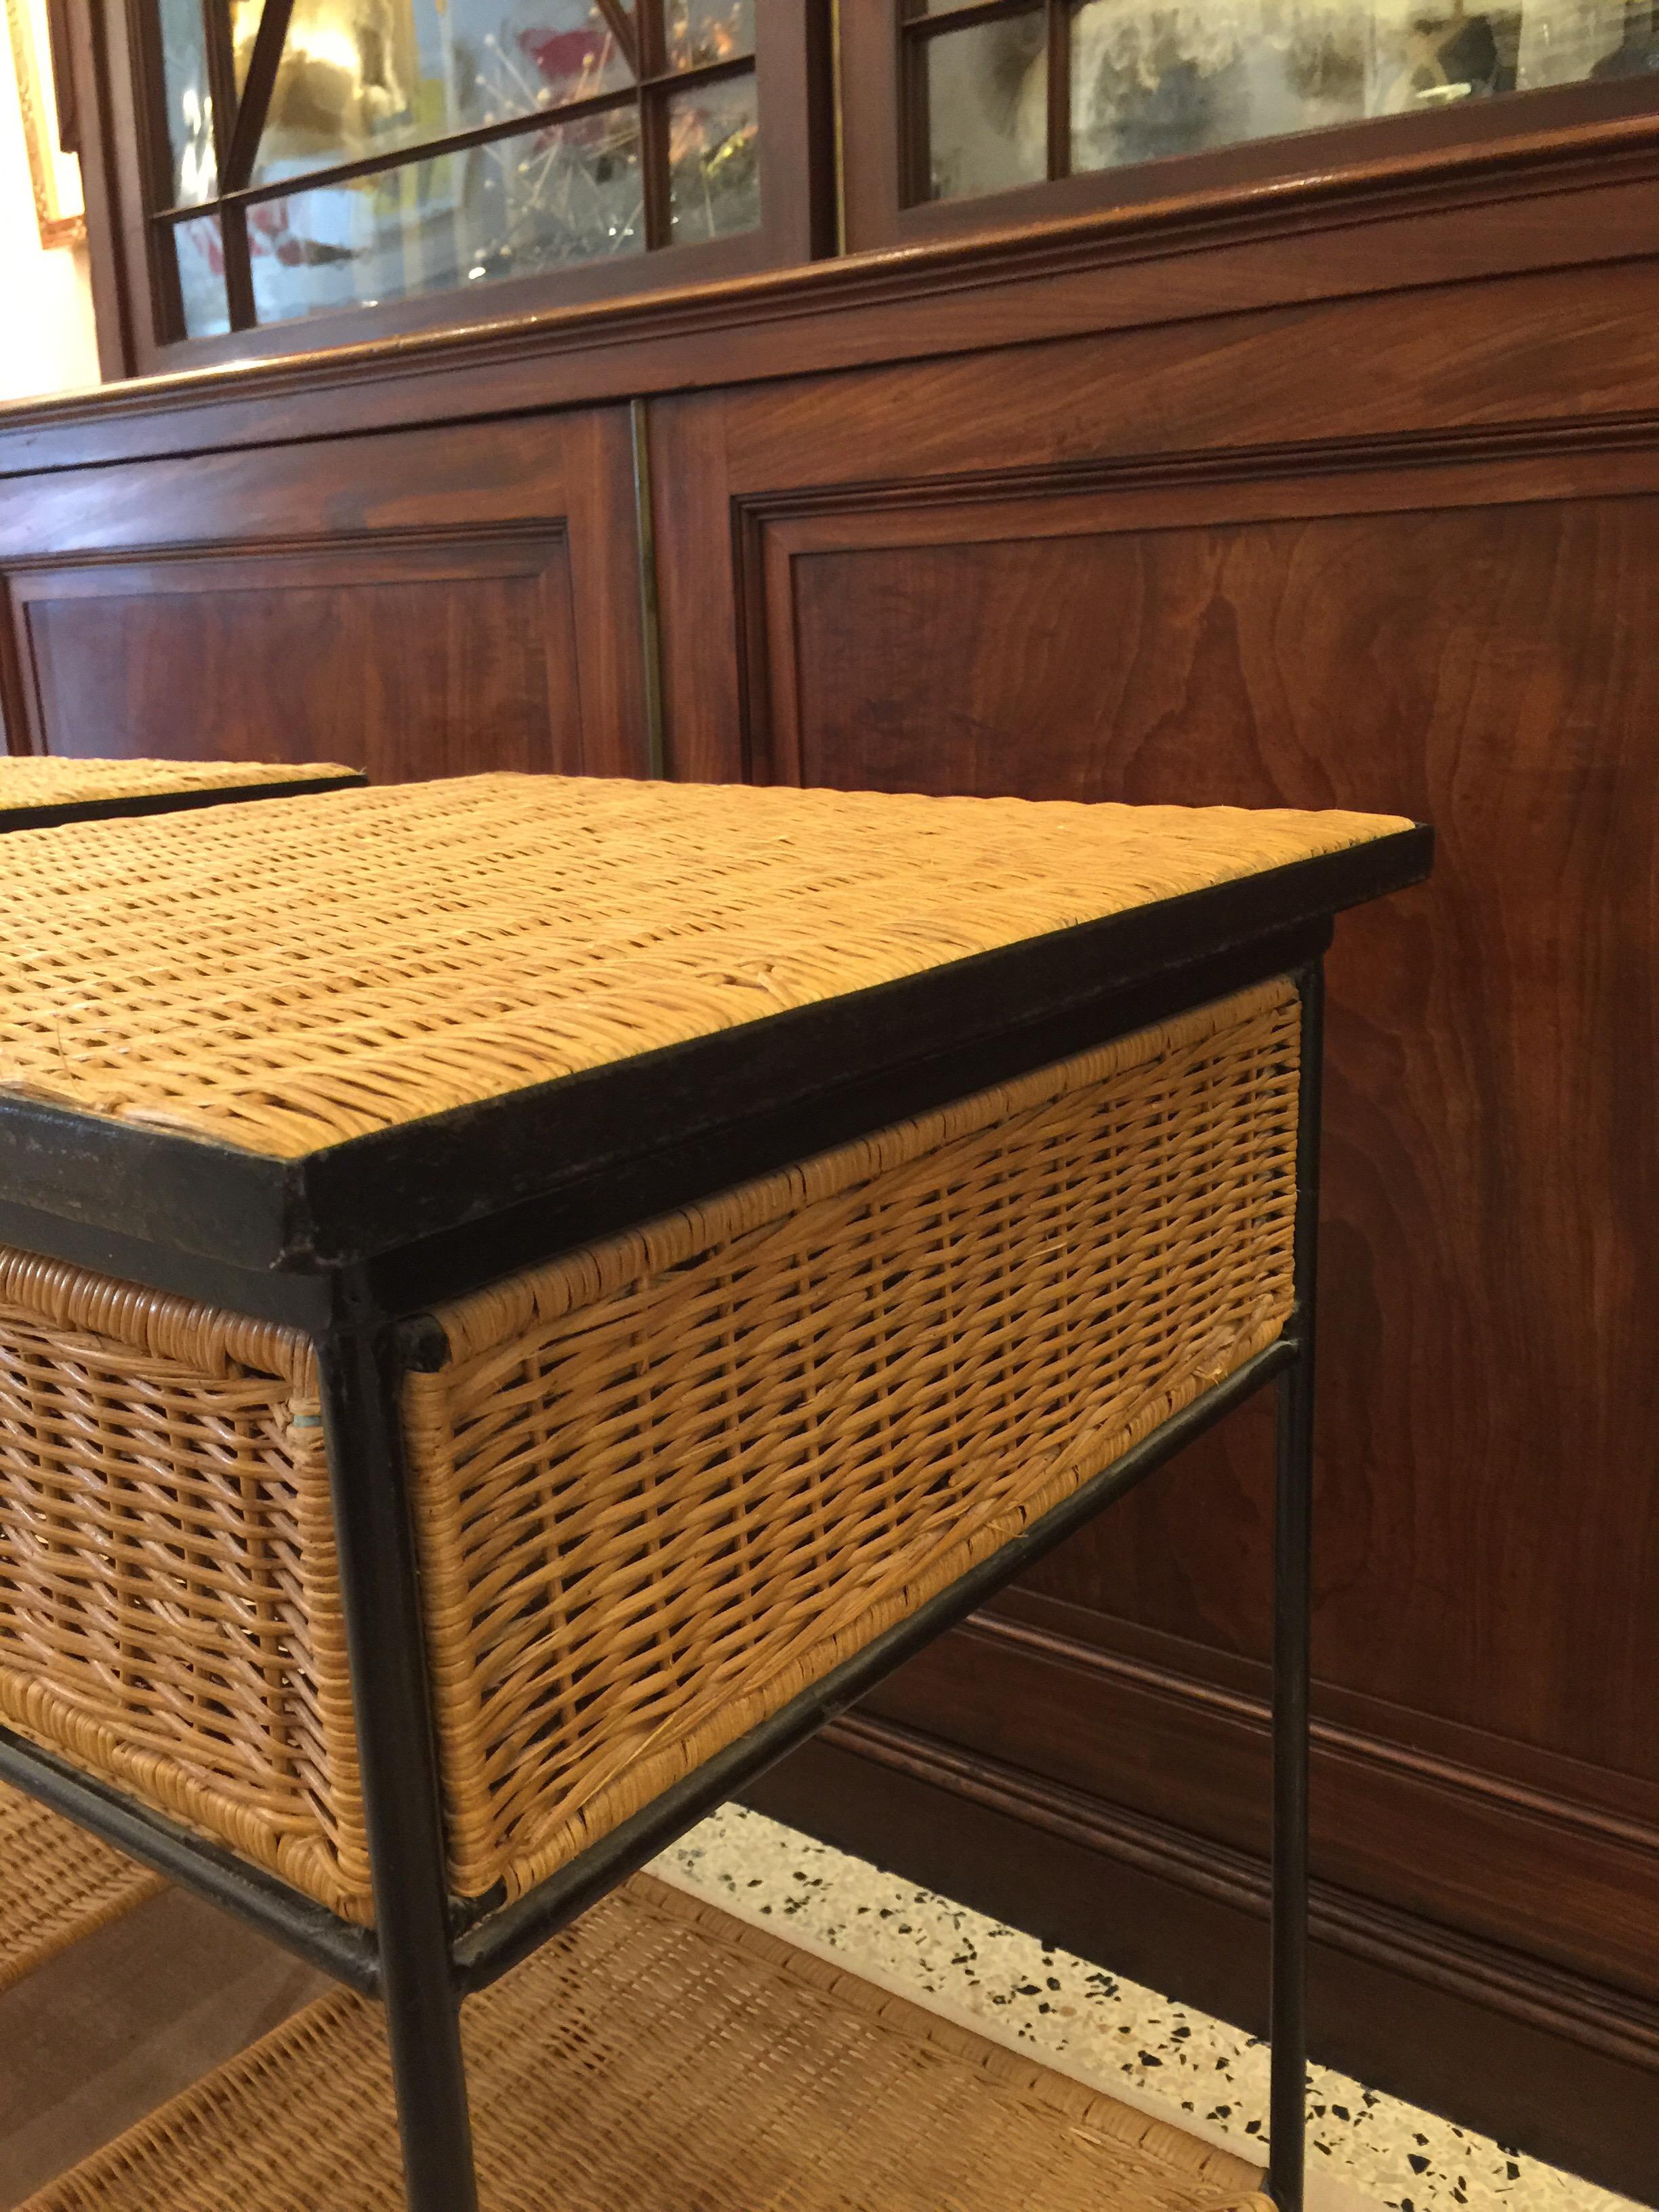 Vintage side tables in black metal frame and wicker. Very well constructed with single full wicker drawer per table and lower shelf. Very similar to work of Paul McCobb and Arthur Umanoff.